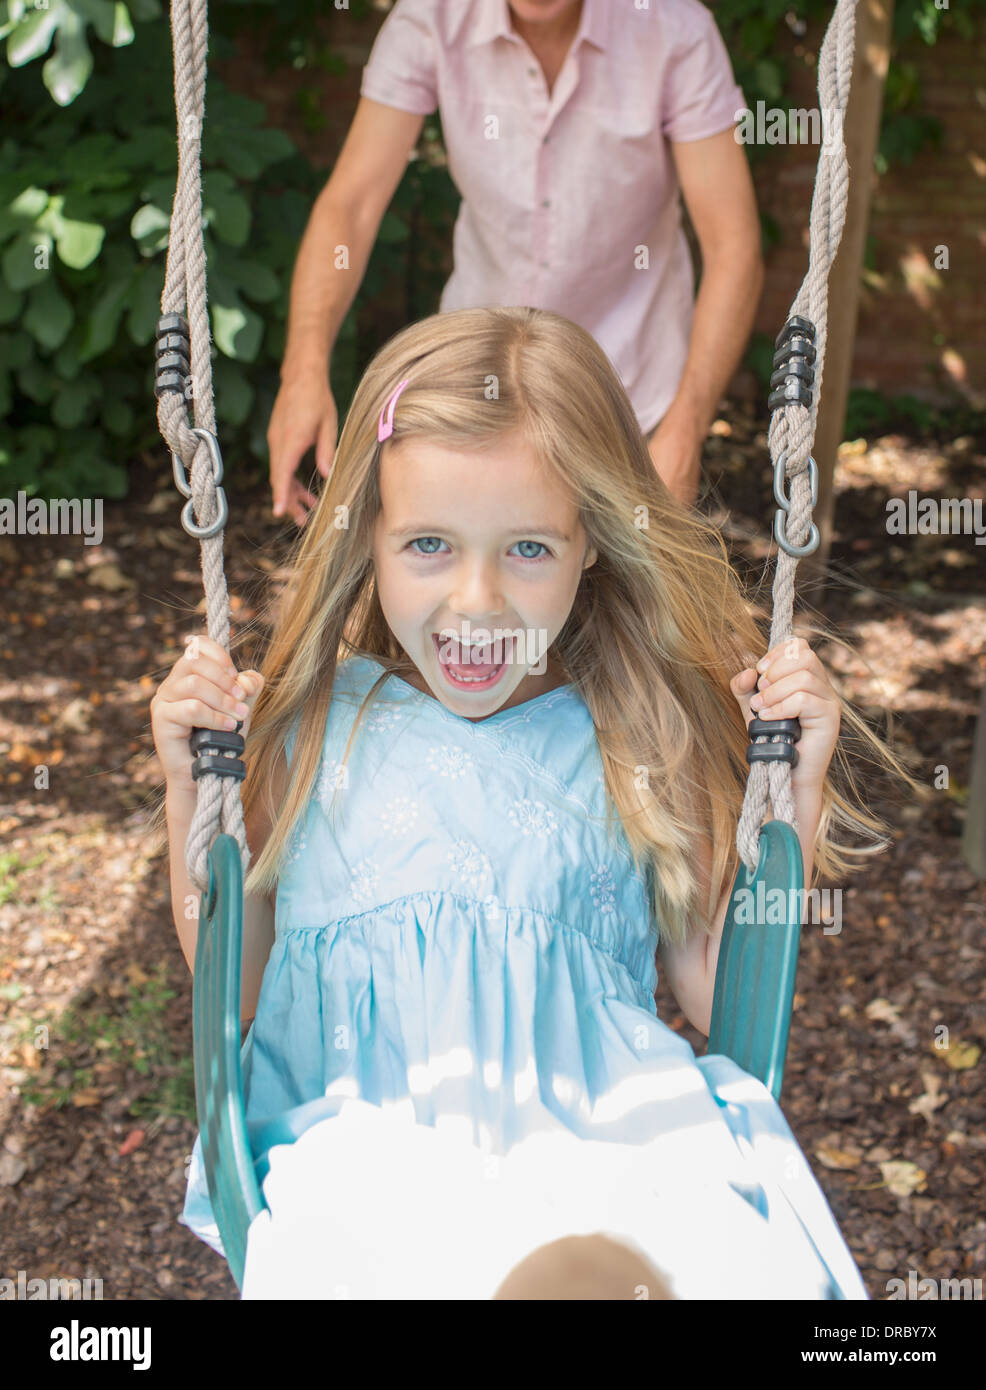 Father pushing daughter in swing Stock Photo